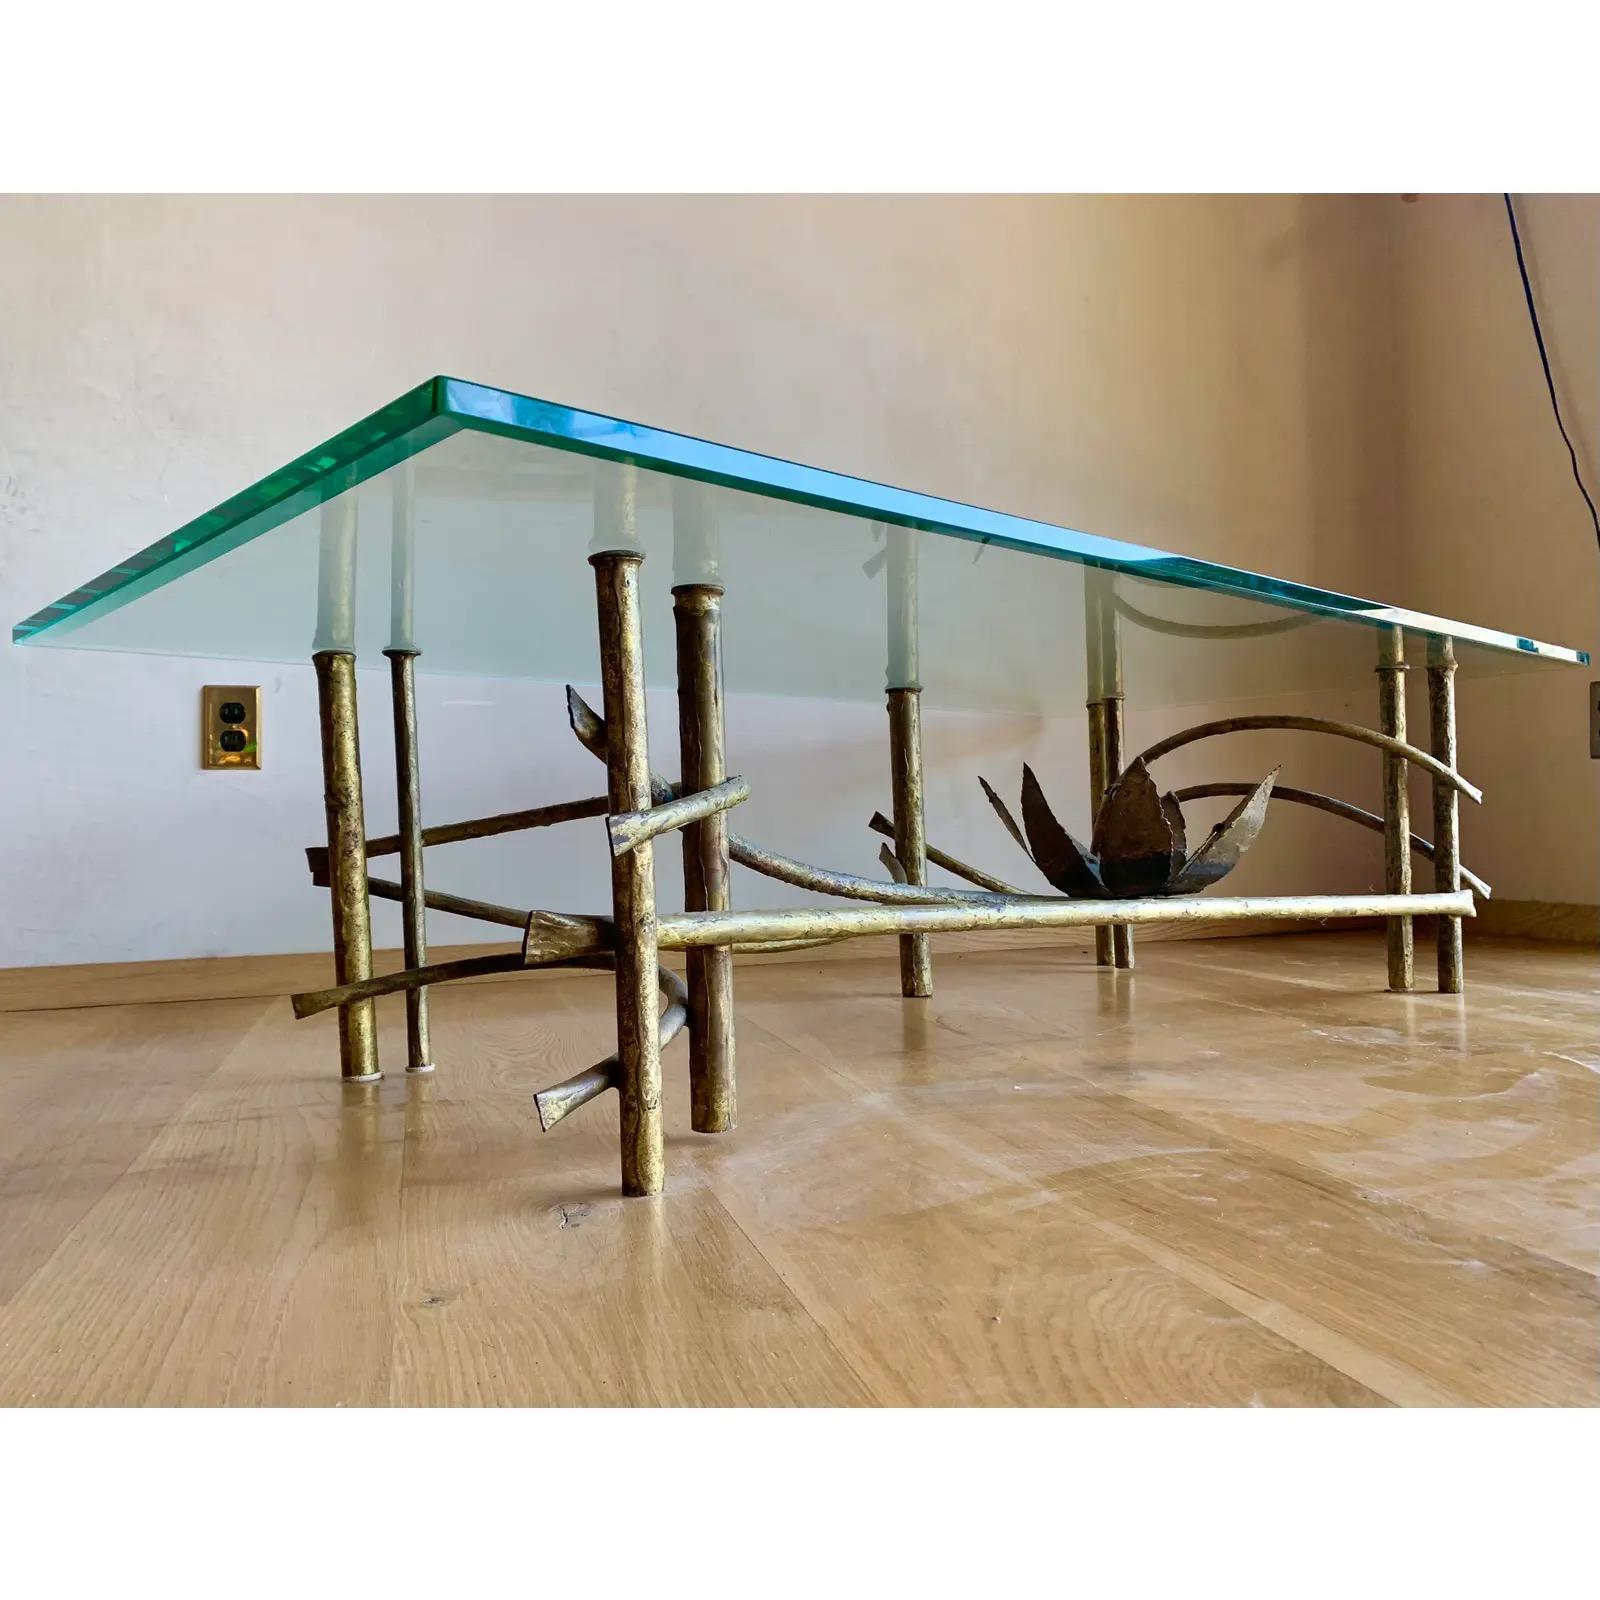 Iconic design piece of mixed metal with gilt finish. Torch cut giant lotus flower blossoms inside a curving, sculptural frame. Both elegant and Brutalist, this piece adds the ideal edge to any space.
Original, heavy beveled high quality glass table